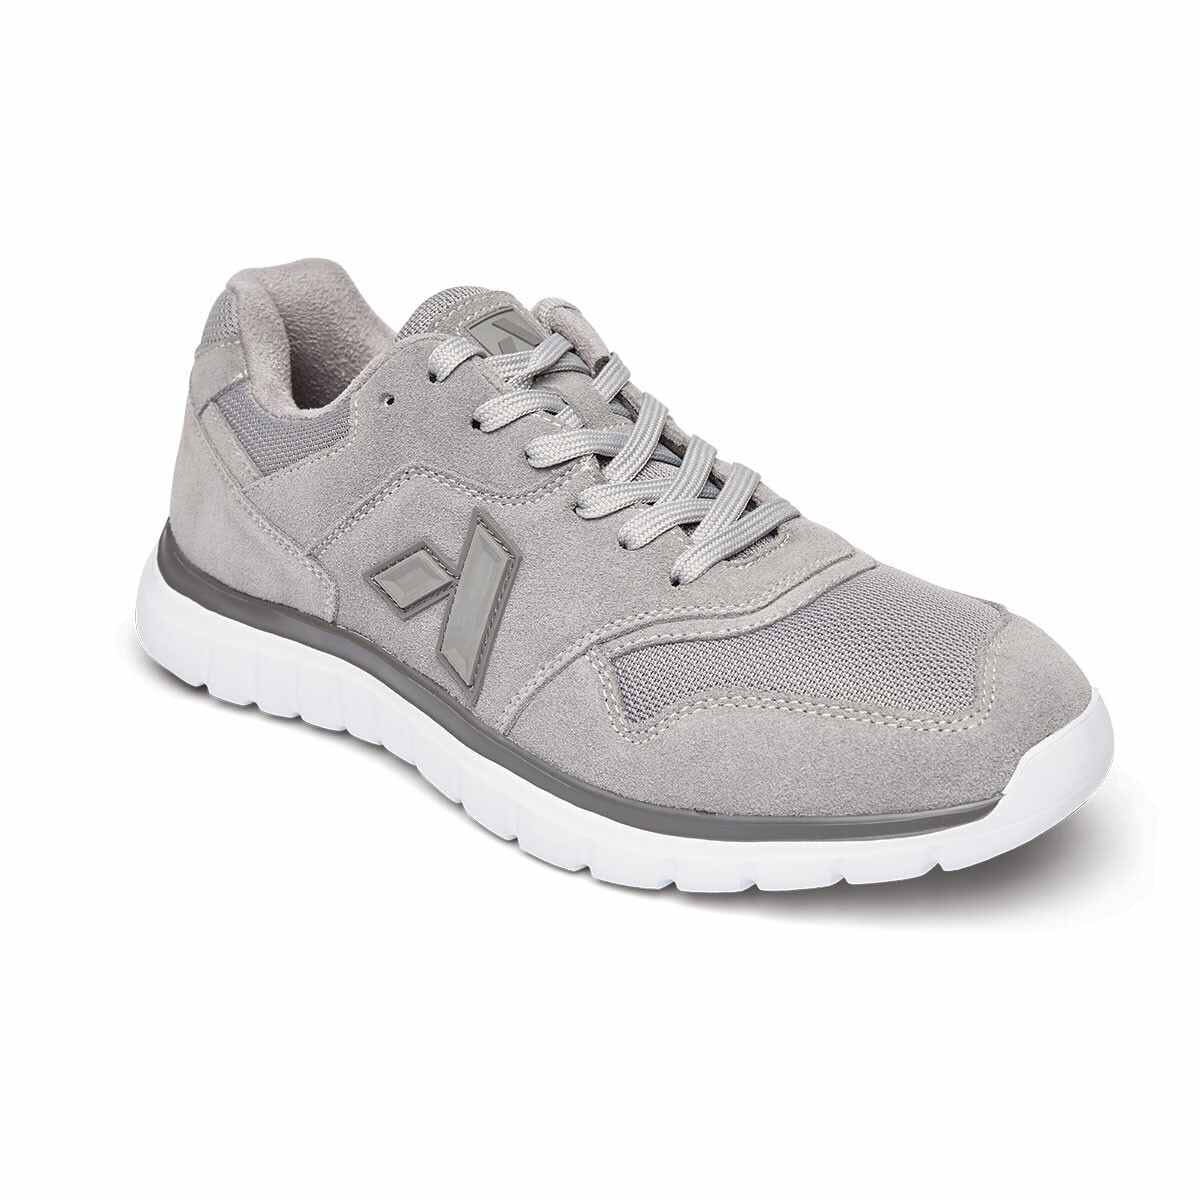 A single Anodyne gray athletic sneaker with a lightweight outsole and white laces, displayed on a plain white background.